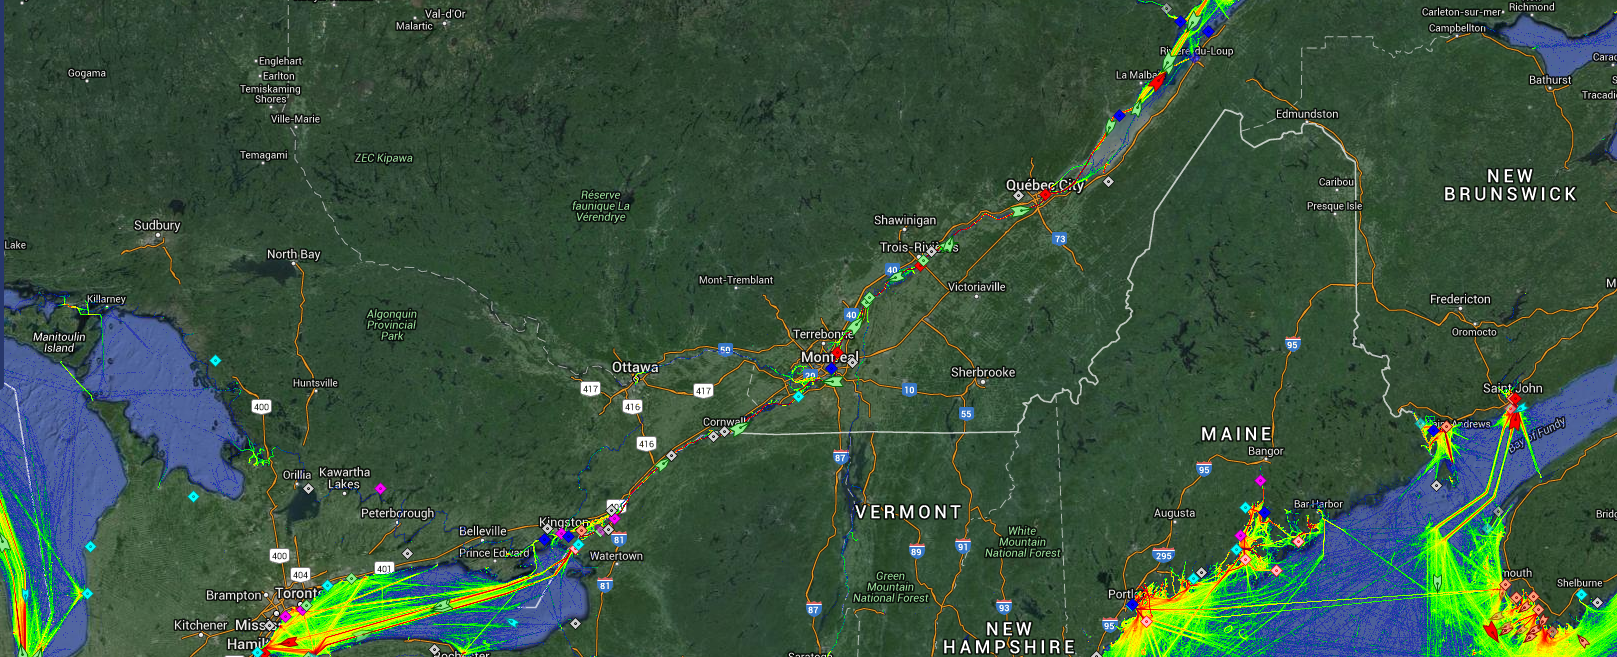 Live Marine Traffic, Density Map and Current Position of ships in SAINT LAWRENCE RIVER